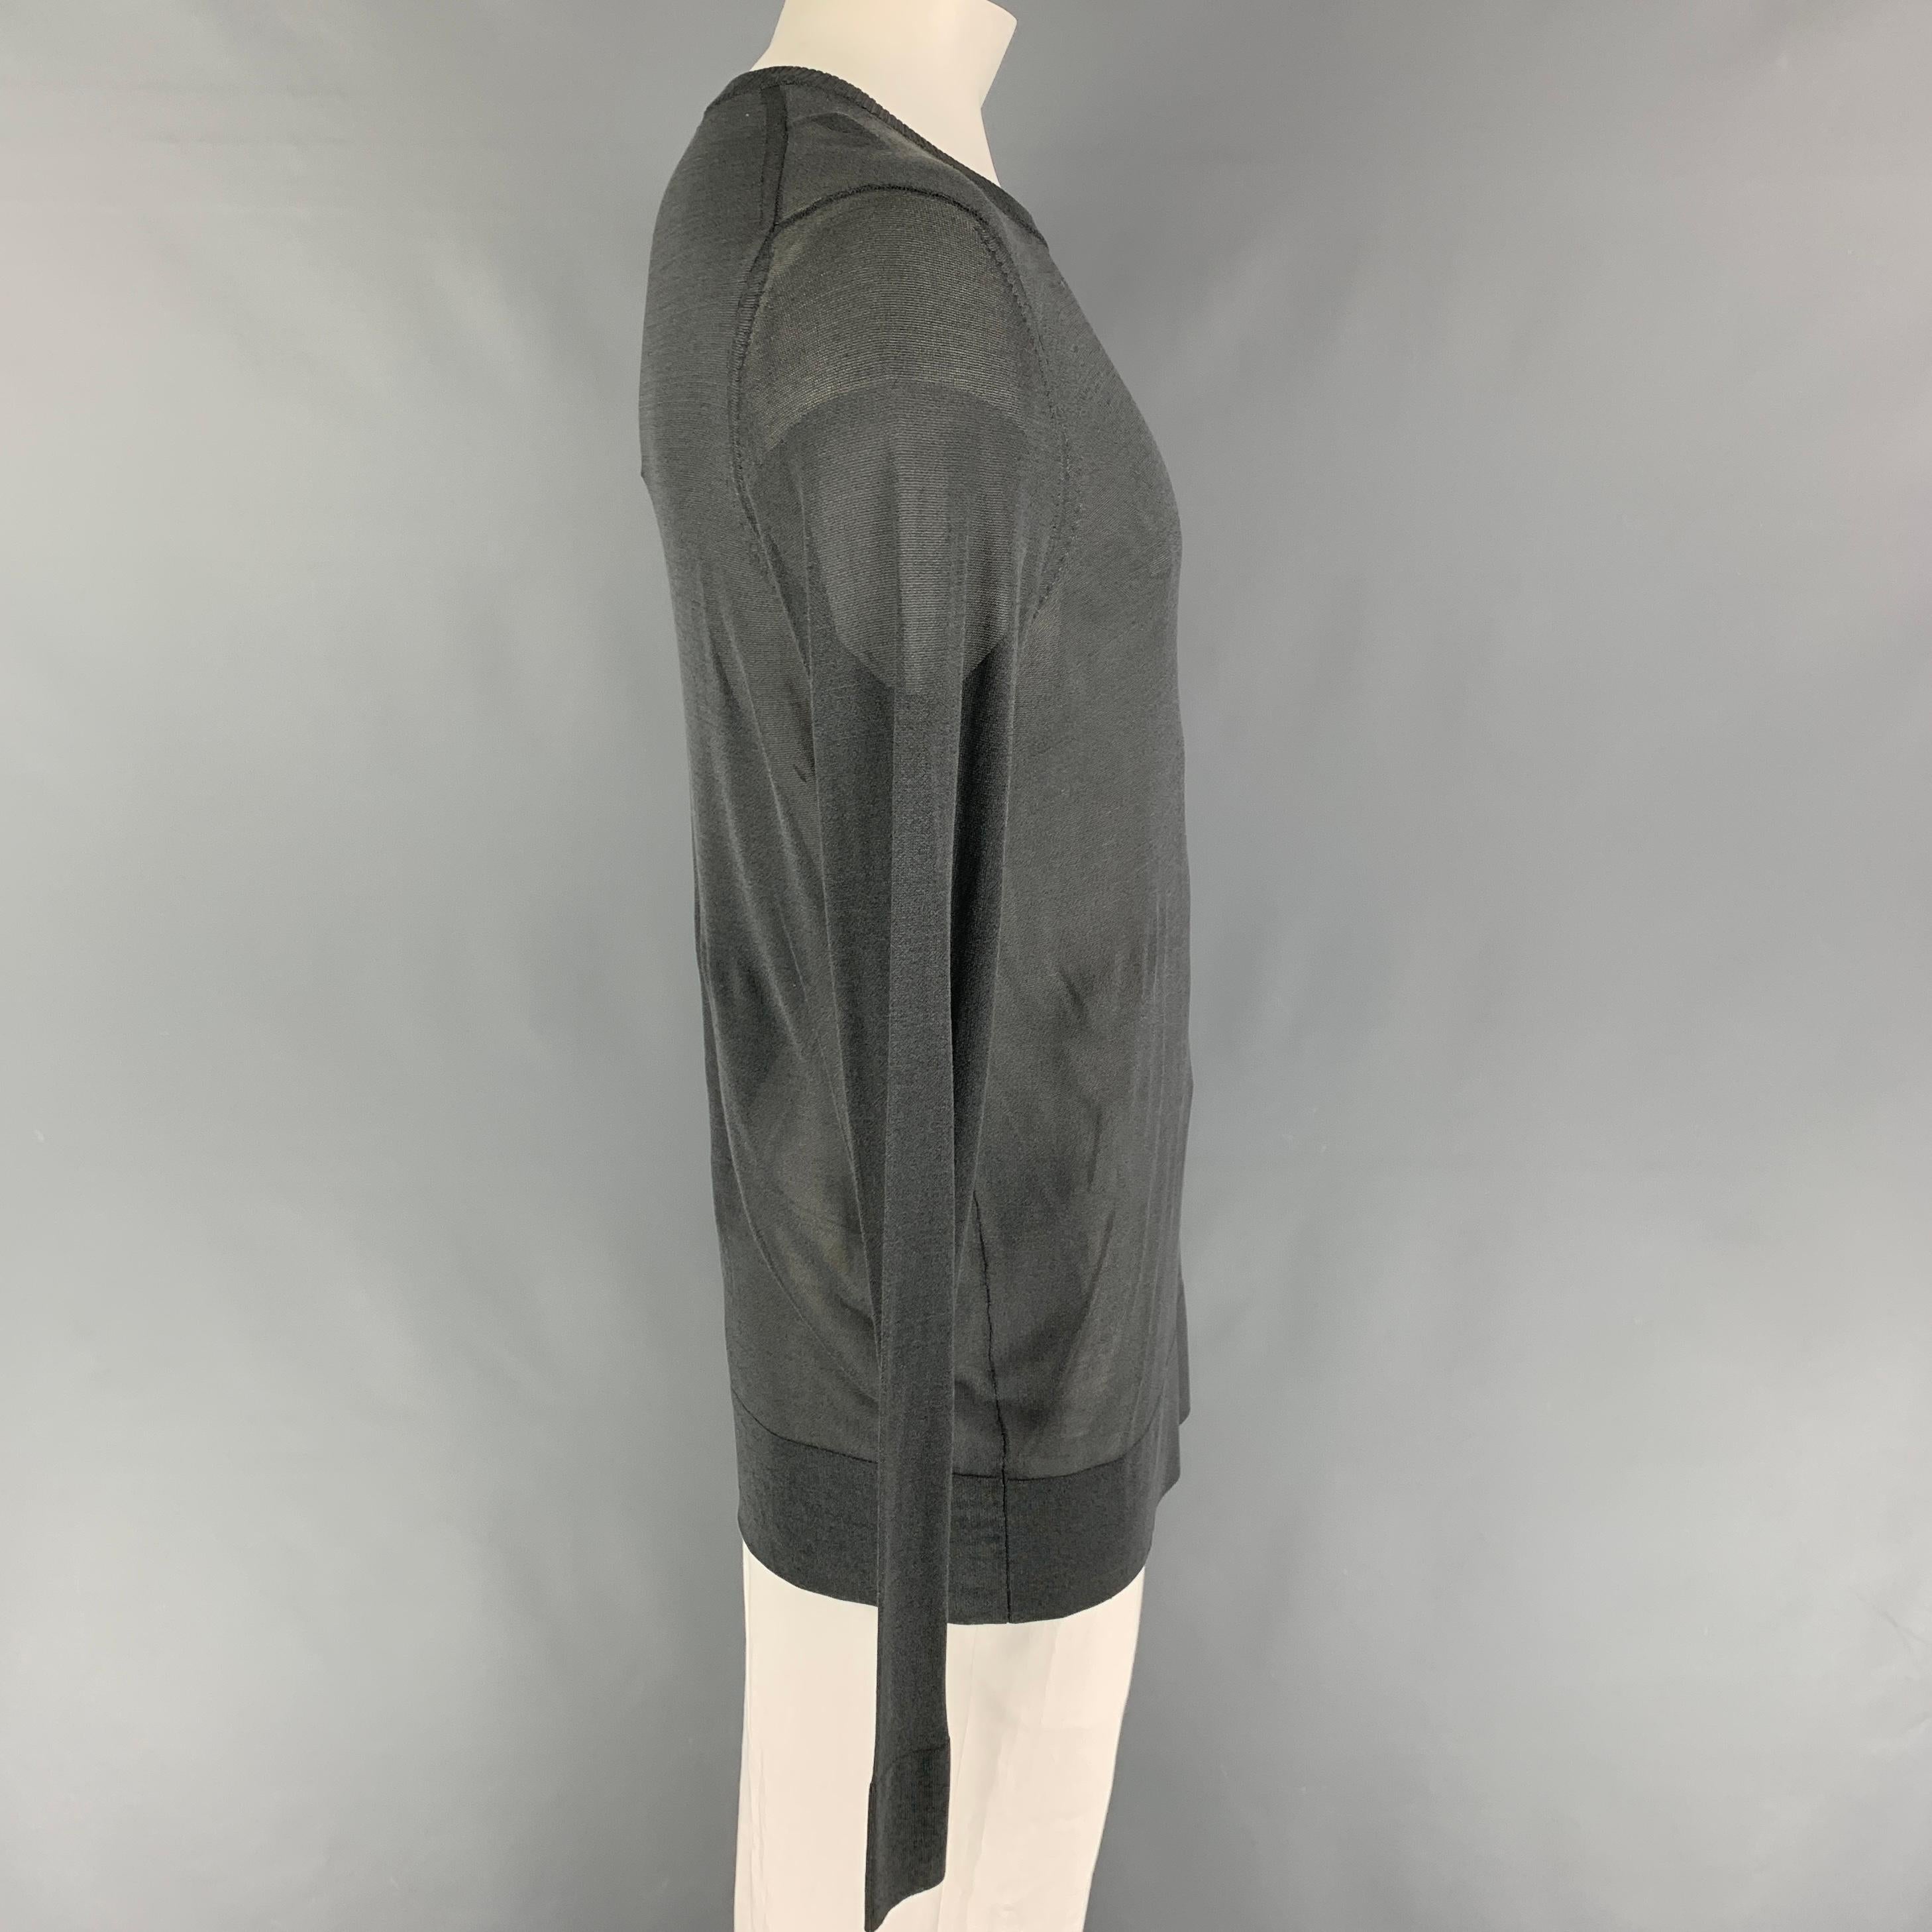 Y-3 by YOHJI YAMAMOTO pullover comes in a grey viscose featuring a crew-neck. 

Very Good Pre-Owned Condition.
Marked: XL

Measurements:

Shoulder: 19 in.
Chest: 42 in.
Sleeve: 34 in.
Length: 32 in. 